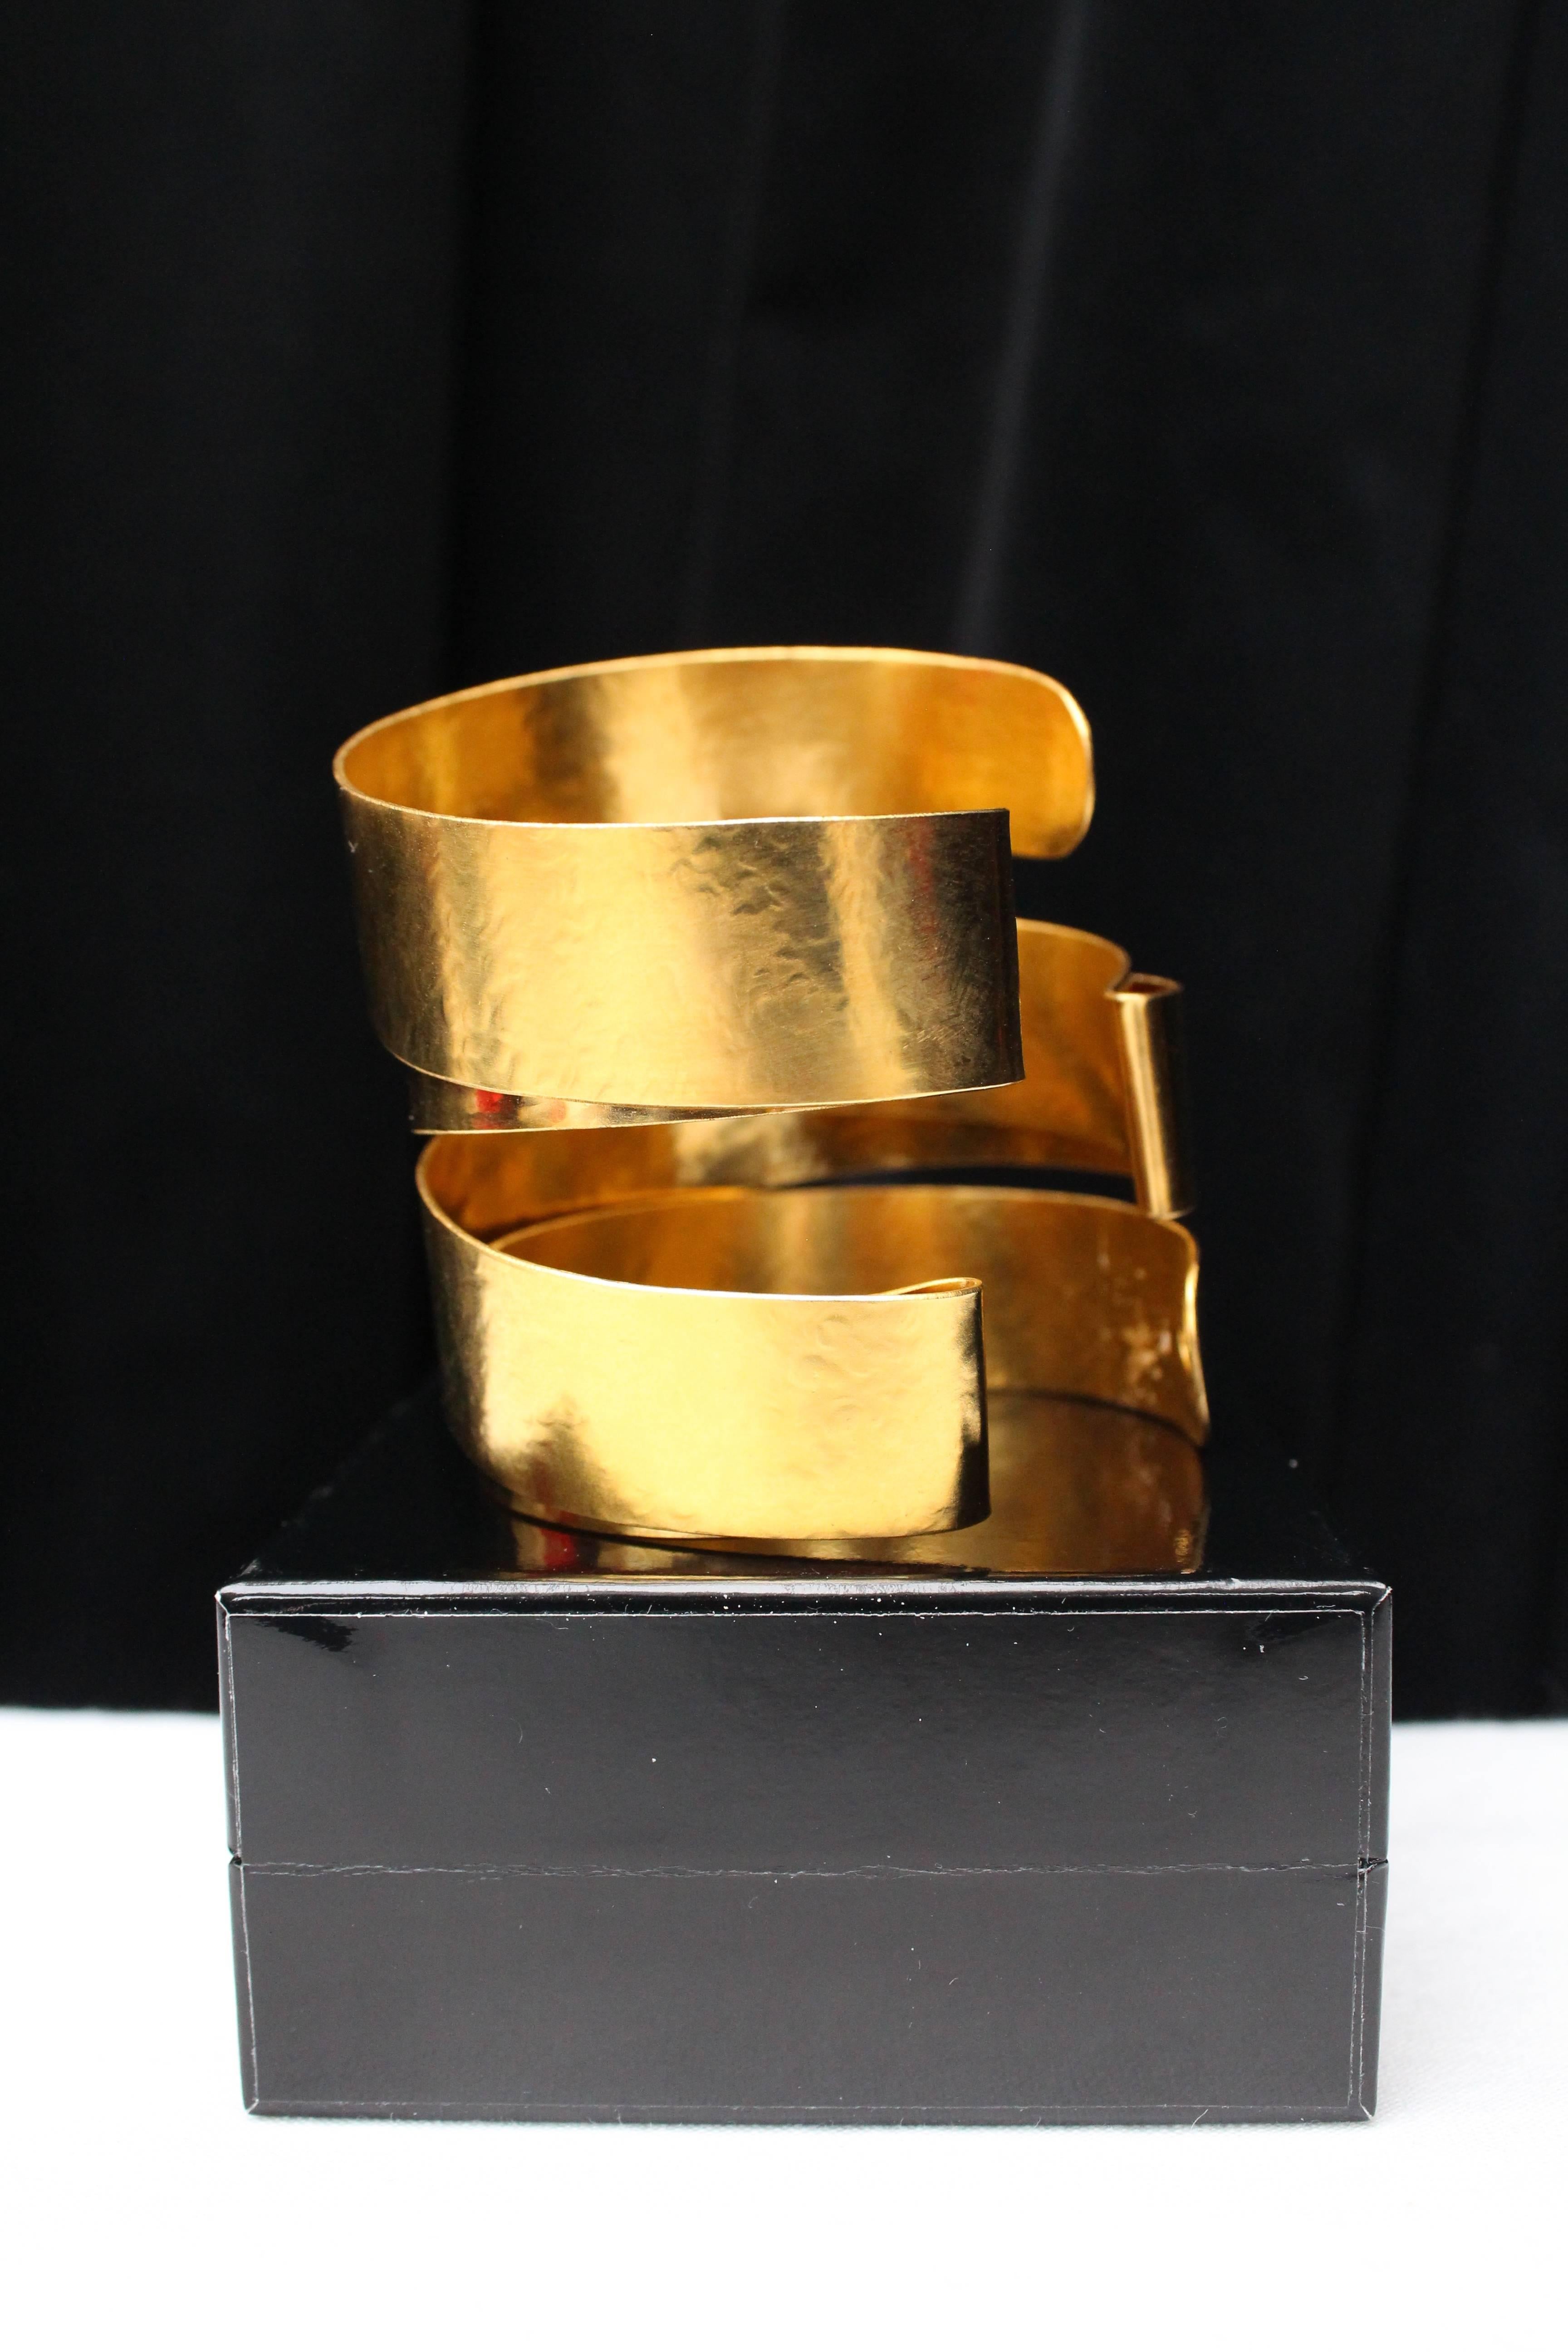 HERVE VAN DER STRAETEN – Wide cuff bracelet composed of hammered gilded metal, representing a spiral. Signed inside.

Circa 2000.

Height 7 cm (2.75 in); Diameter 15 cm;  Opening 3 cm (1.25 in).

Very good condition